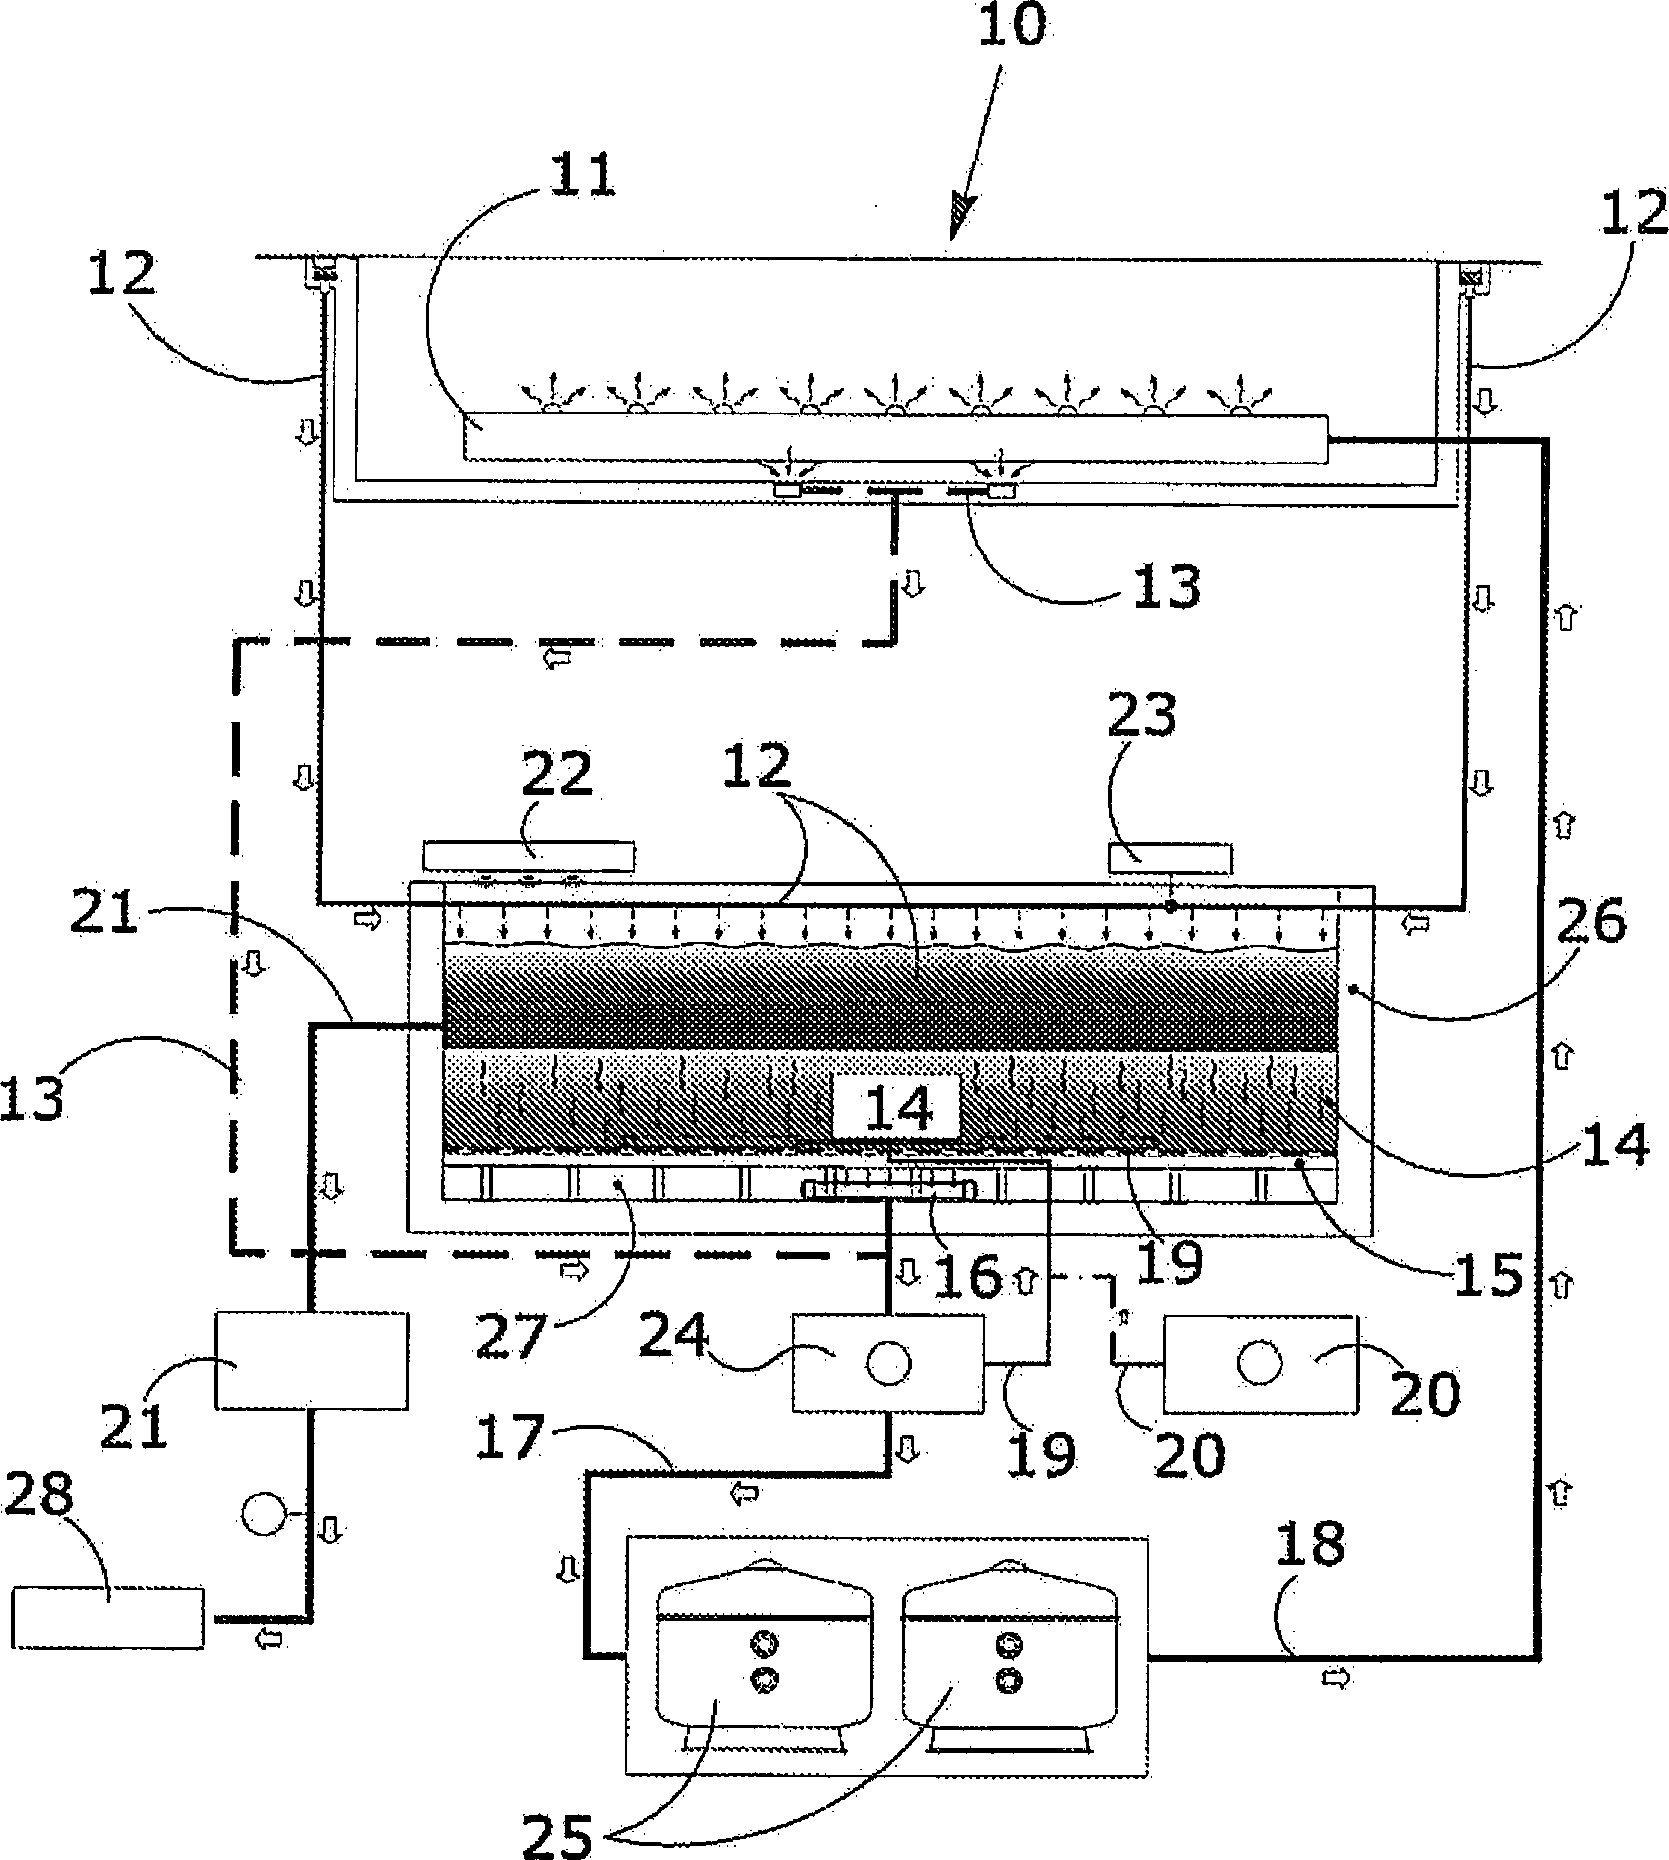 Filtering system for swimming pools